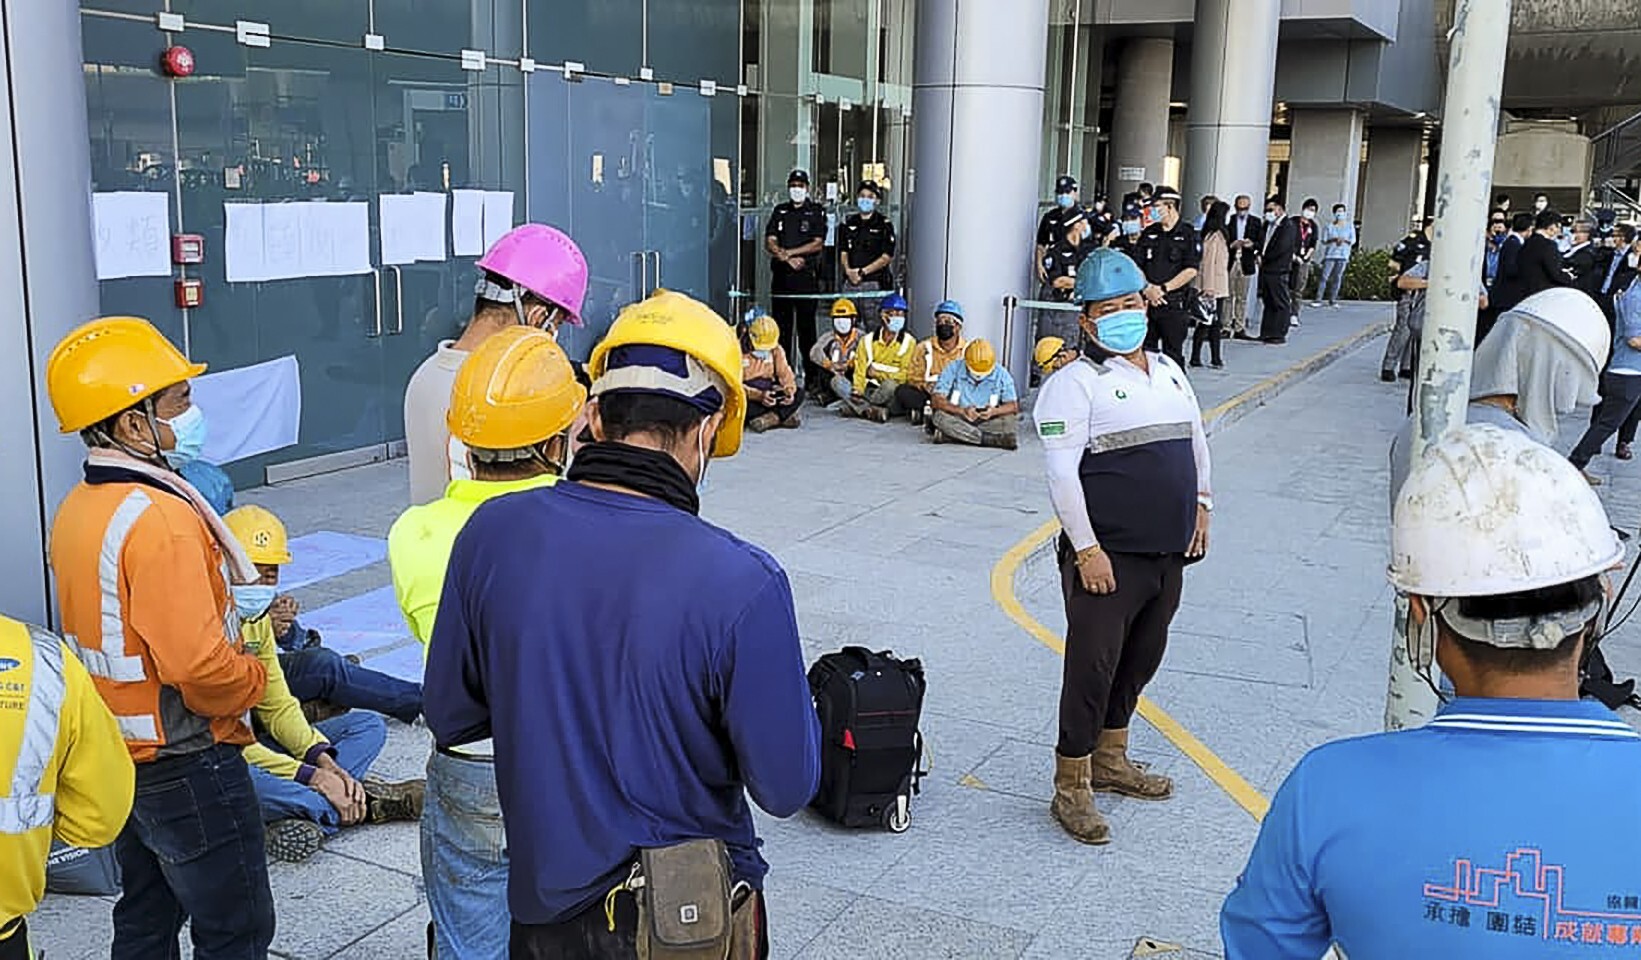 Workers at the third runway project stage a protest. Photo: Facebook